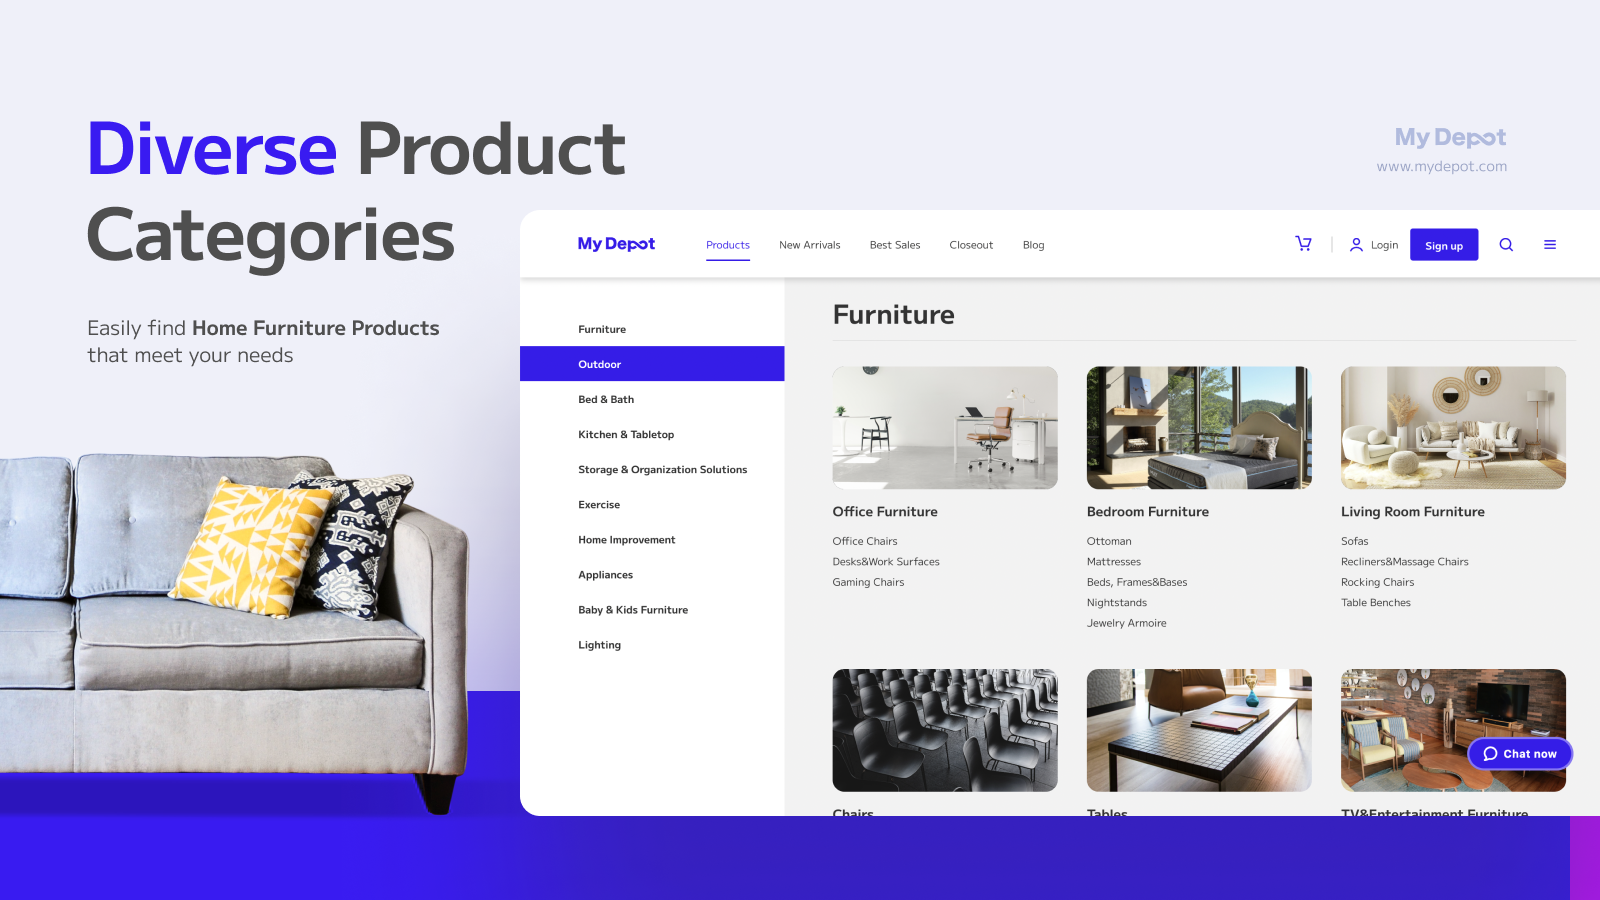 Connect your Shopify store and add products to test and sell.